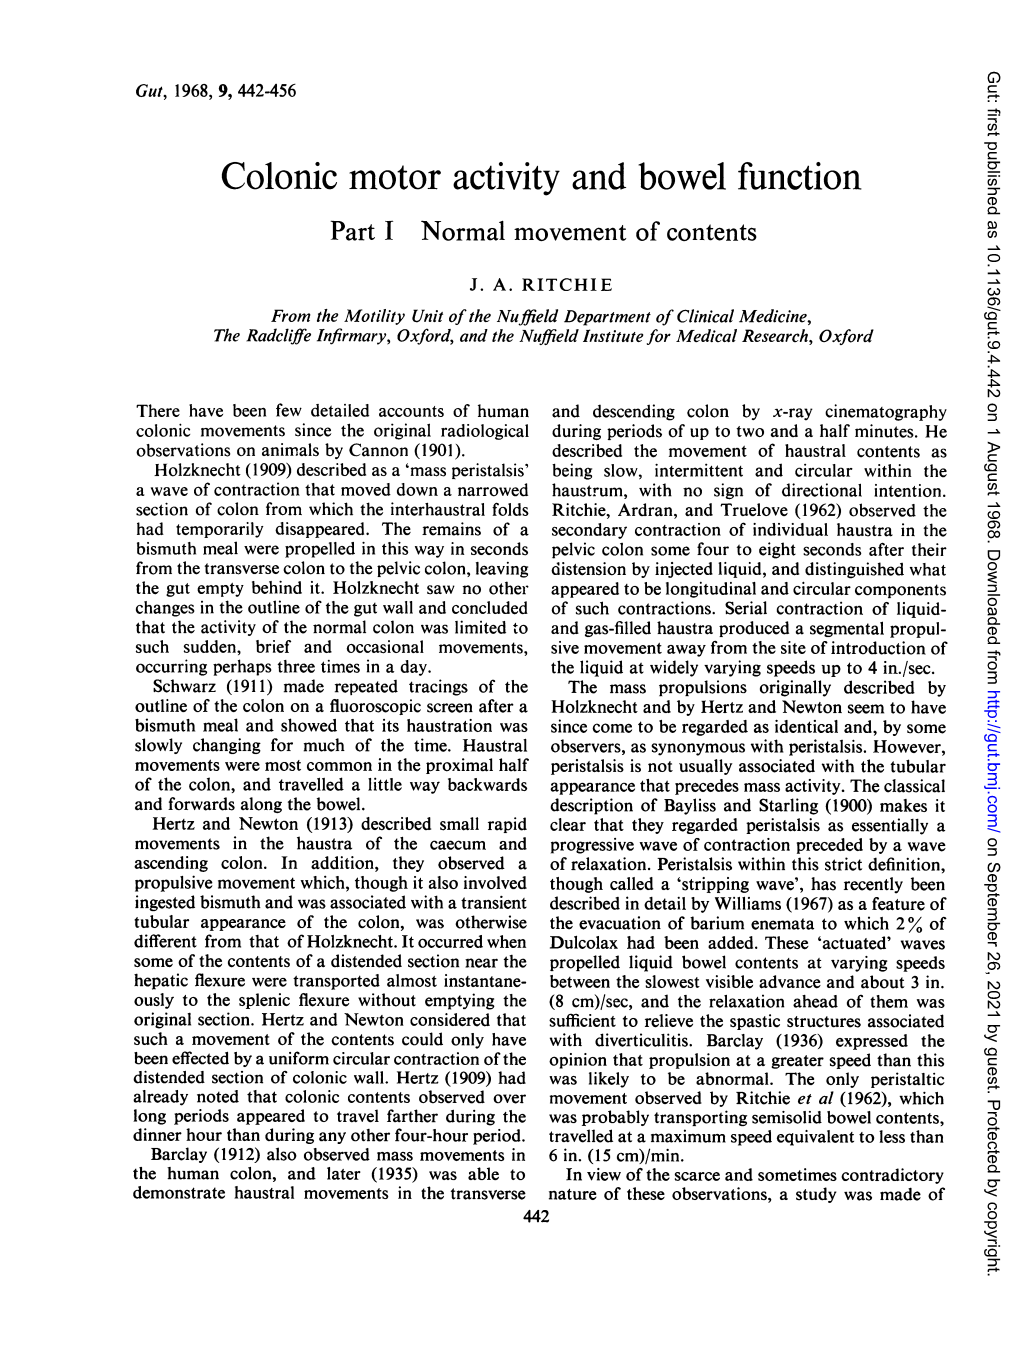 Colonic Motor Activity and Bowel Function